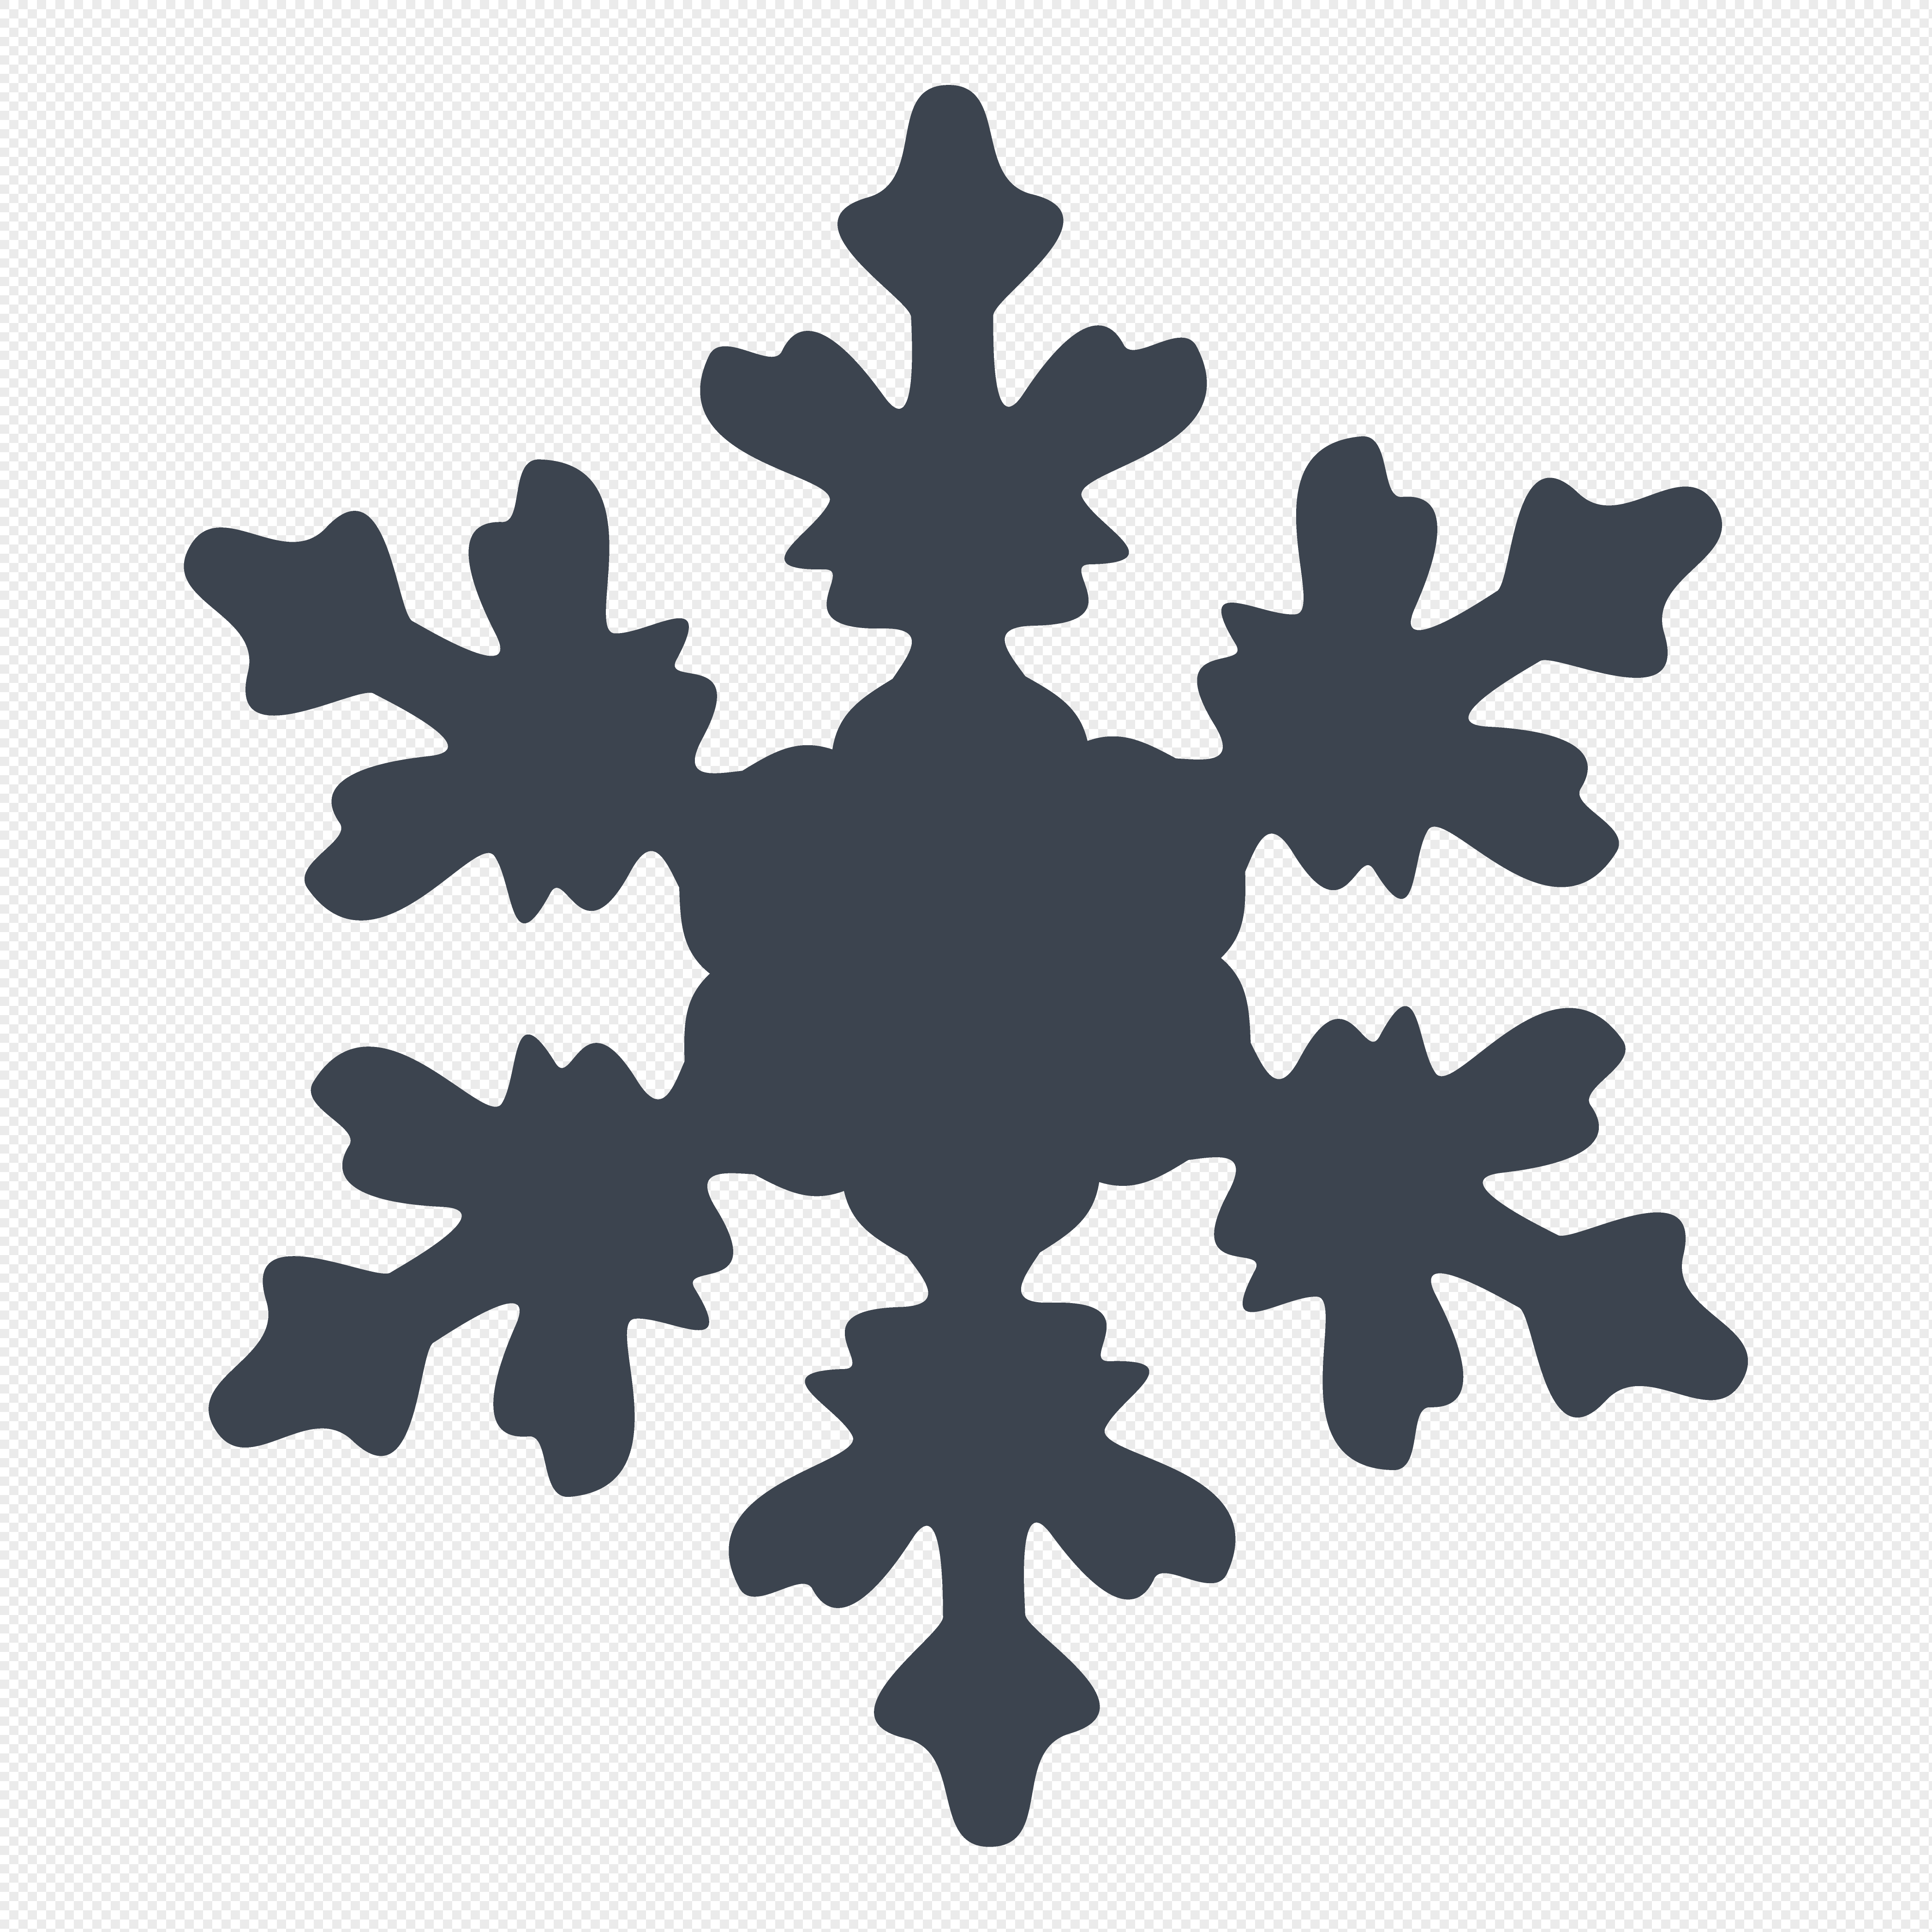 Download Fashion workplace snowflake vector graphics icon png image ...